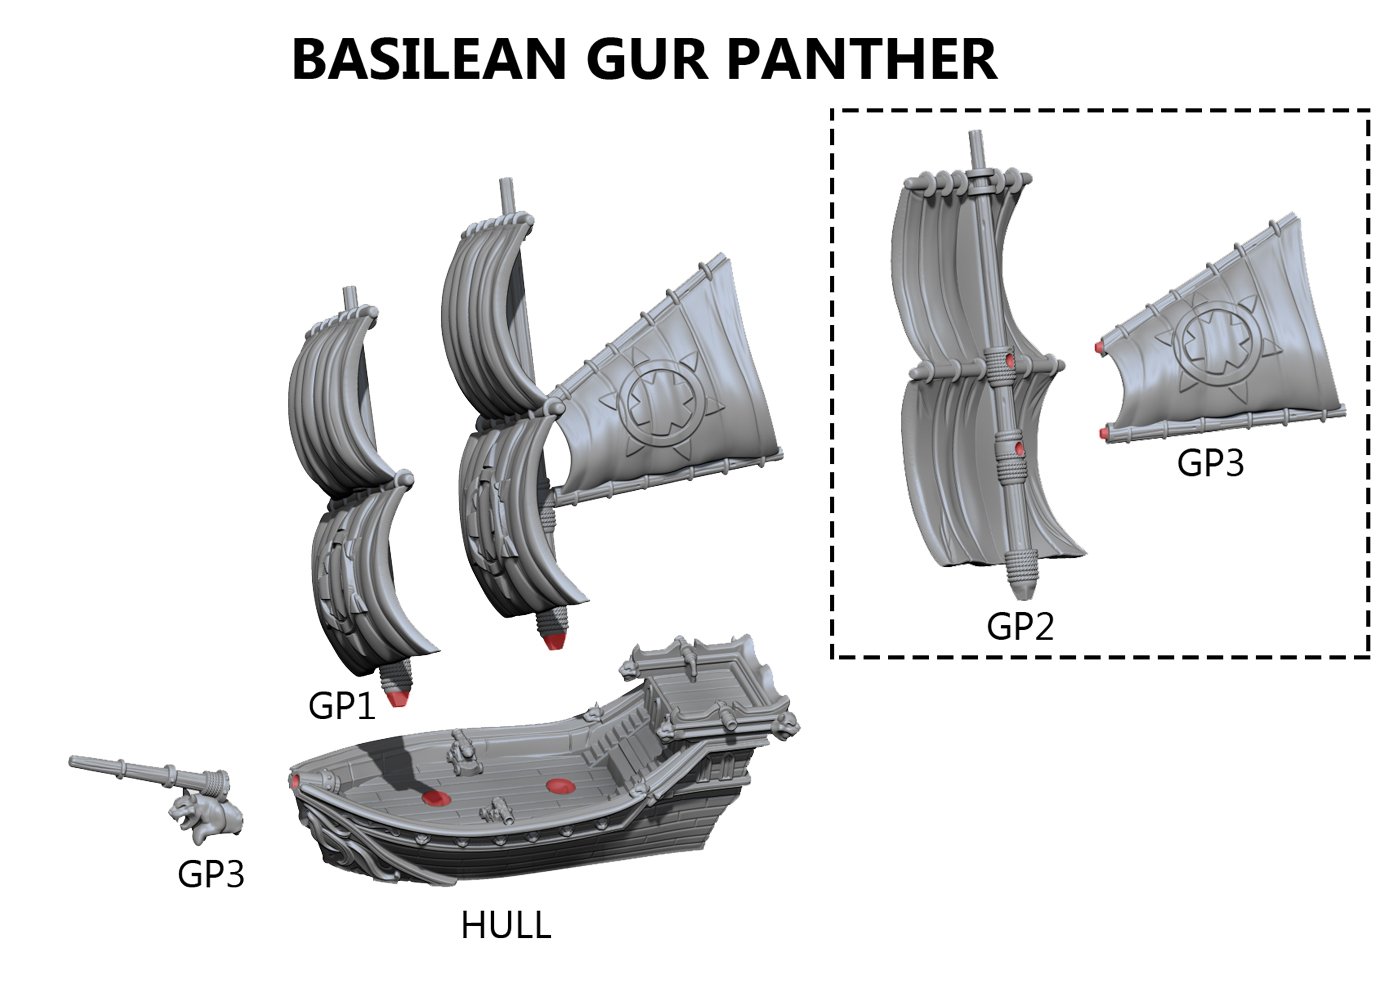 Basilean Gur Panther Assembly Instructions